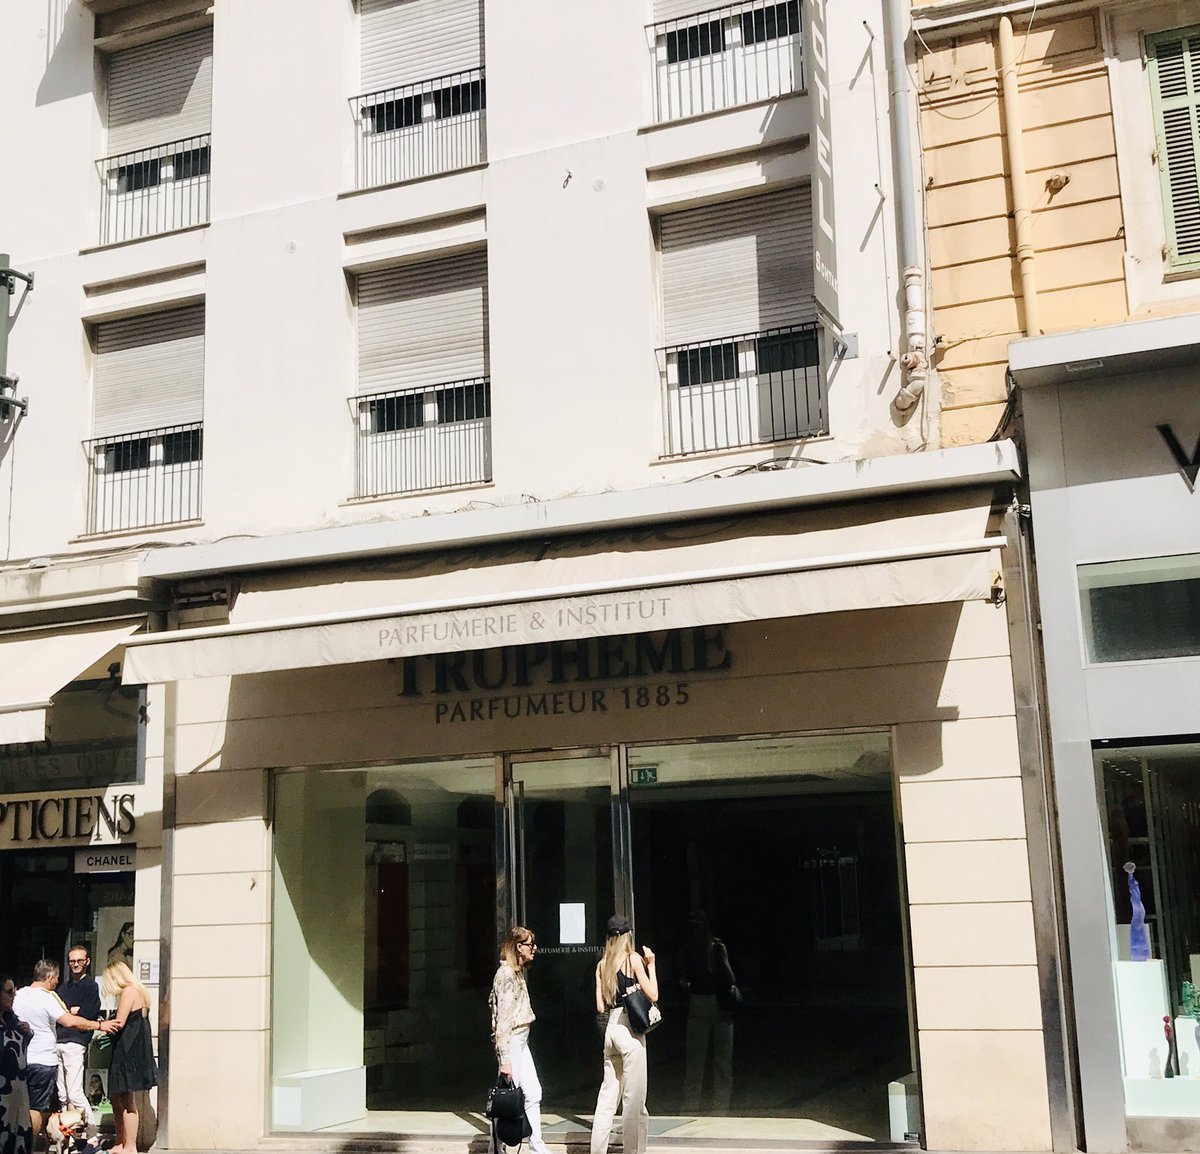 Moved ? Closed down ! Truphème 🤷‍♂️ 🤷‍♀️ #ruedantibes #Cannes 🛍 🚗 🛍